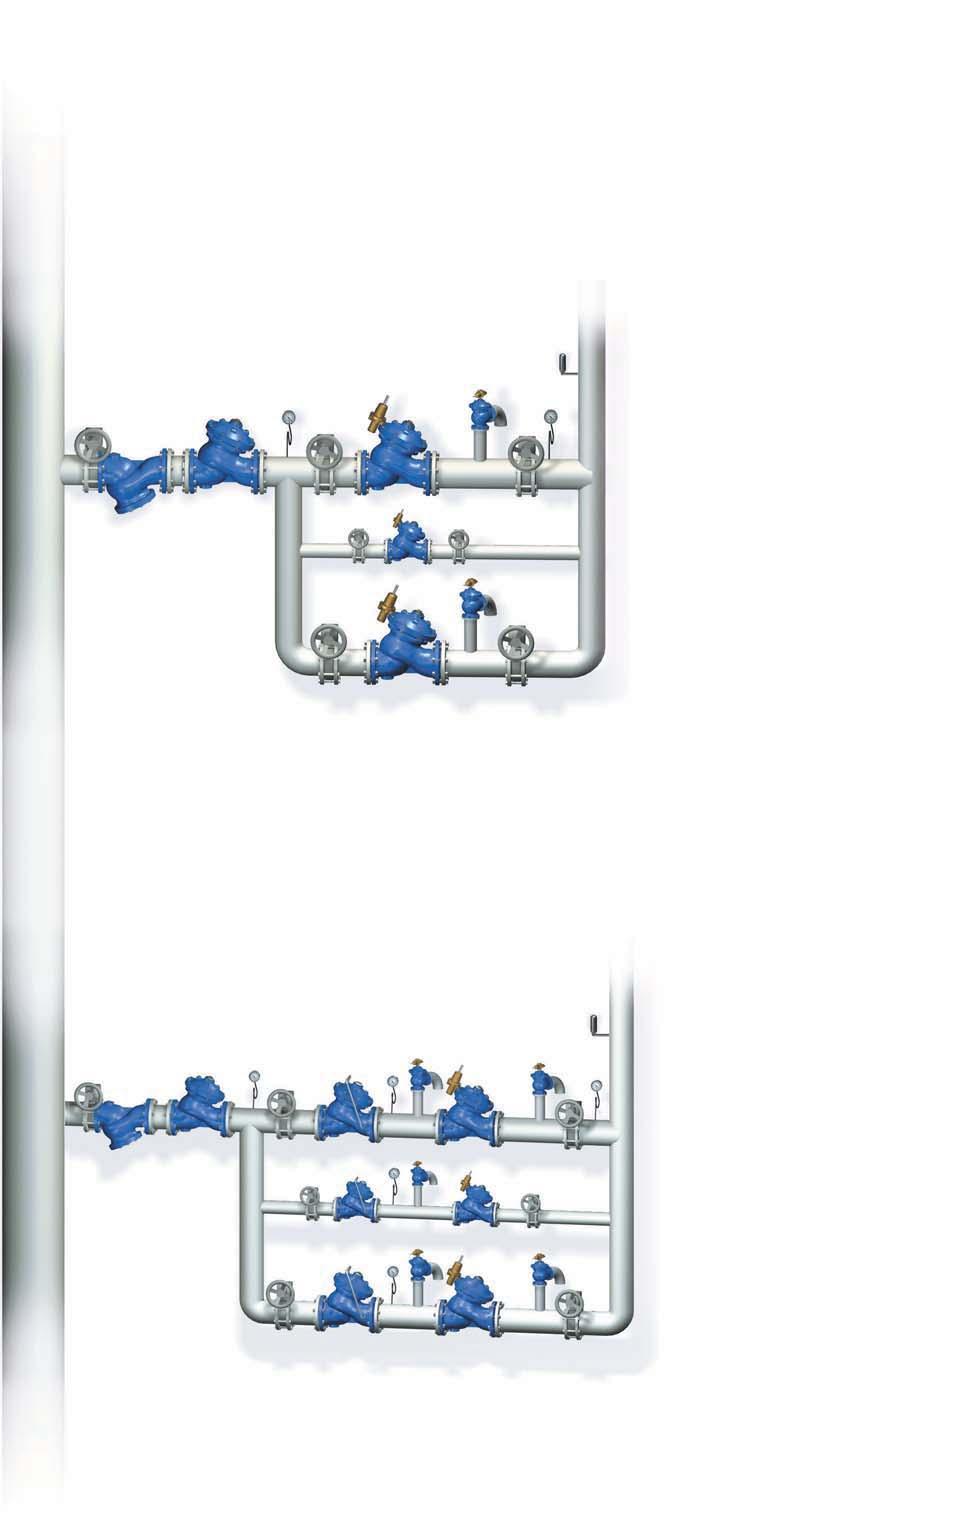 Higher Zone Installation In addition to the municipal pressure reducing system for a high-rise building, BERMD recommends the system also include: Parallel Redundant Branches ensuring uninterrupted